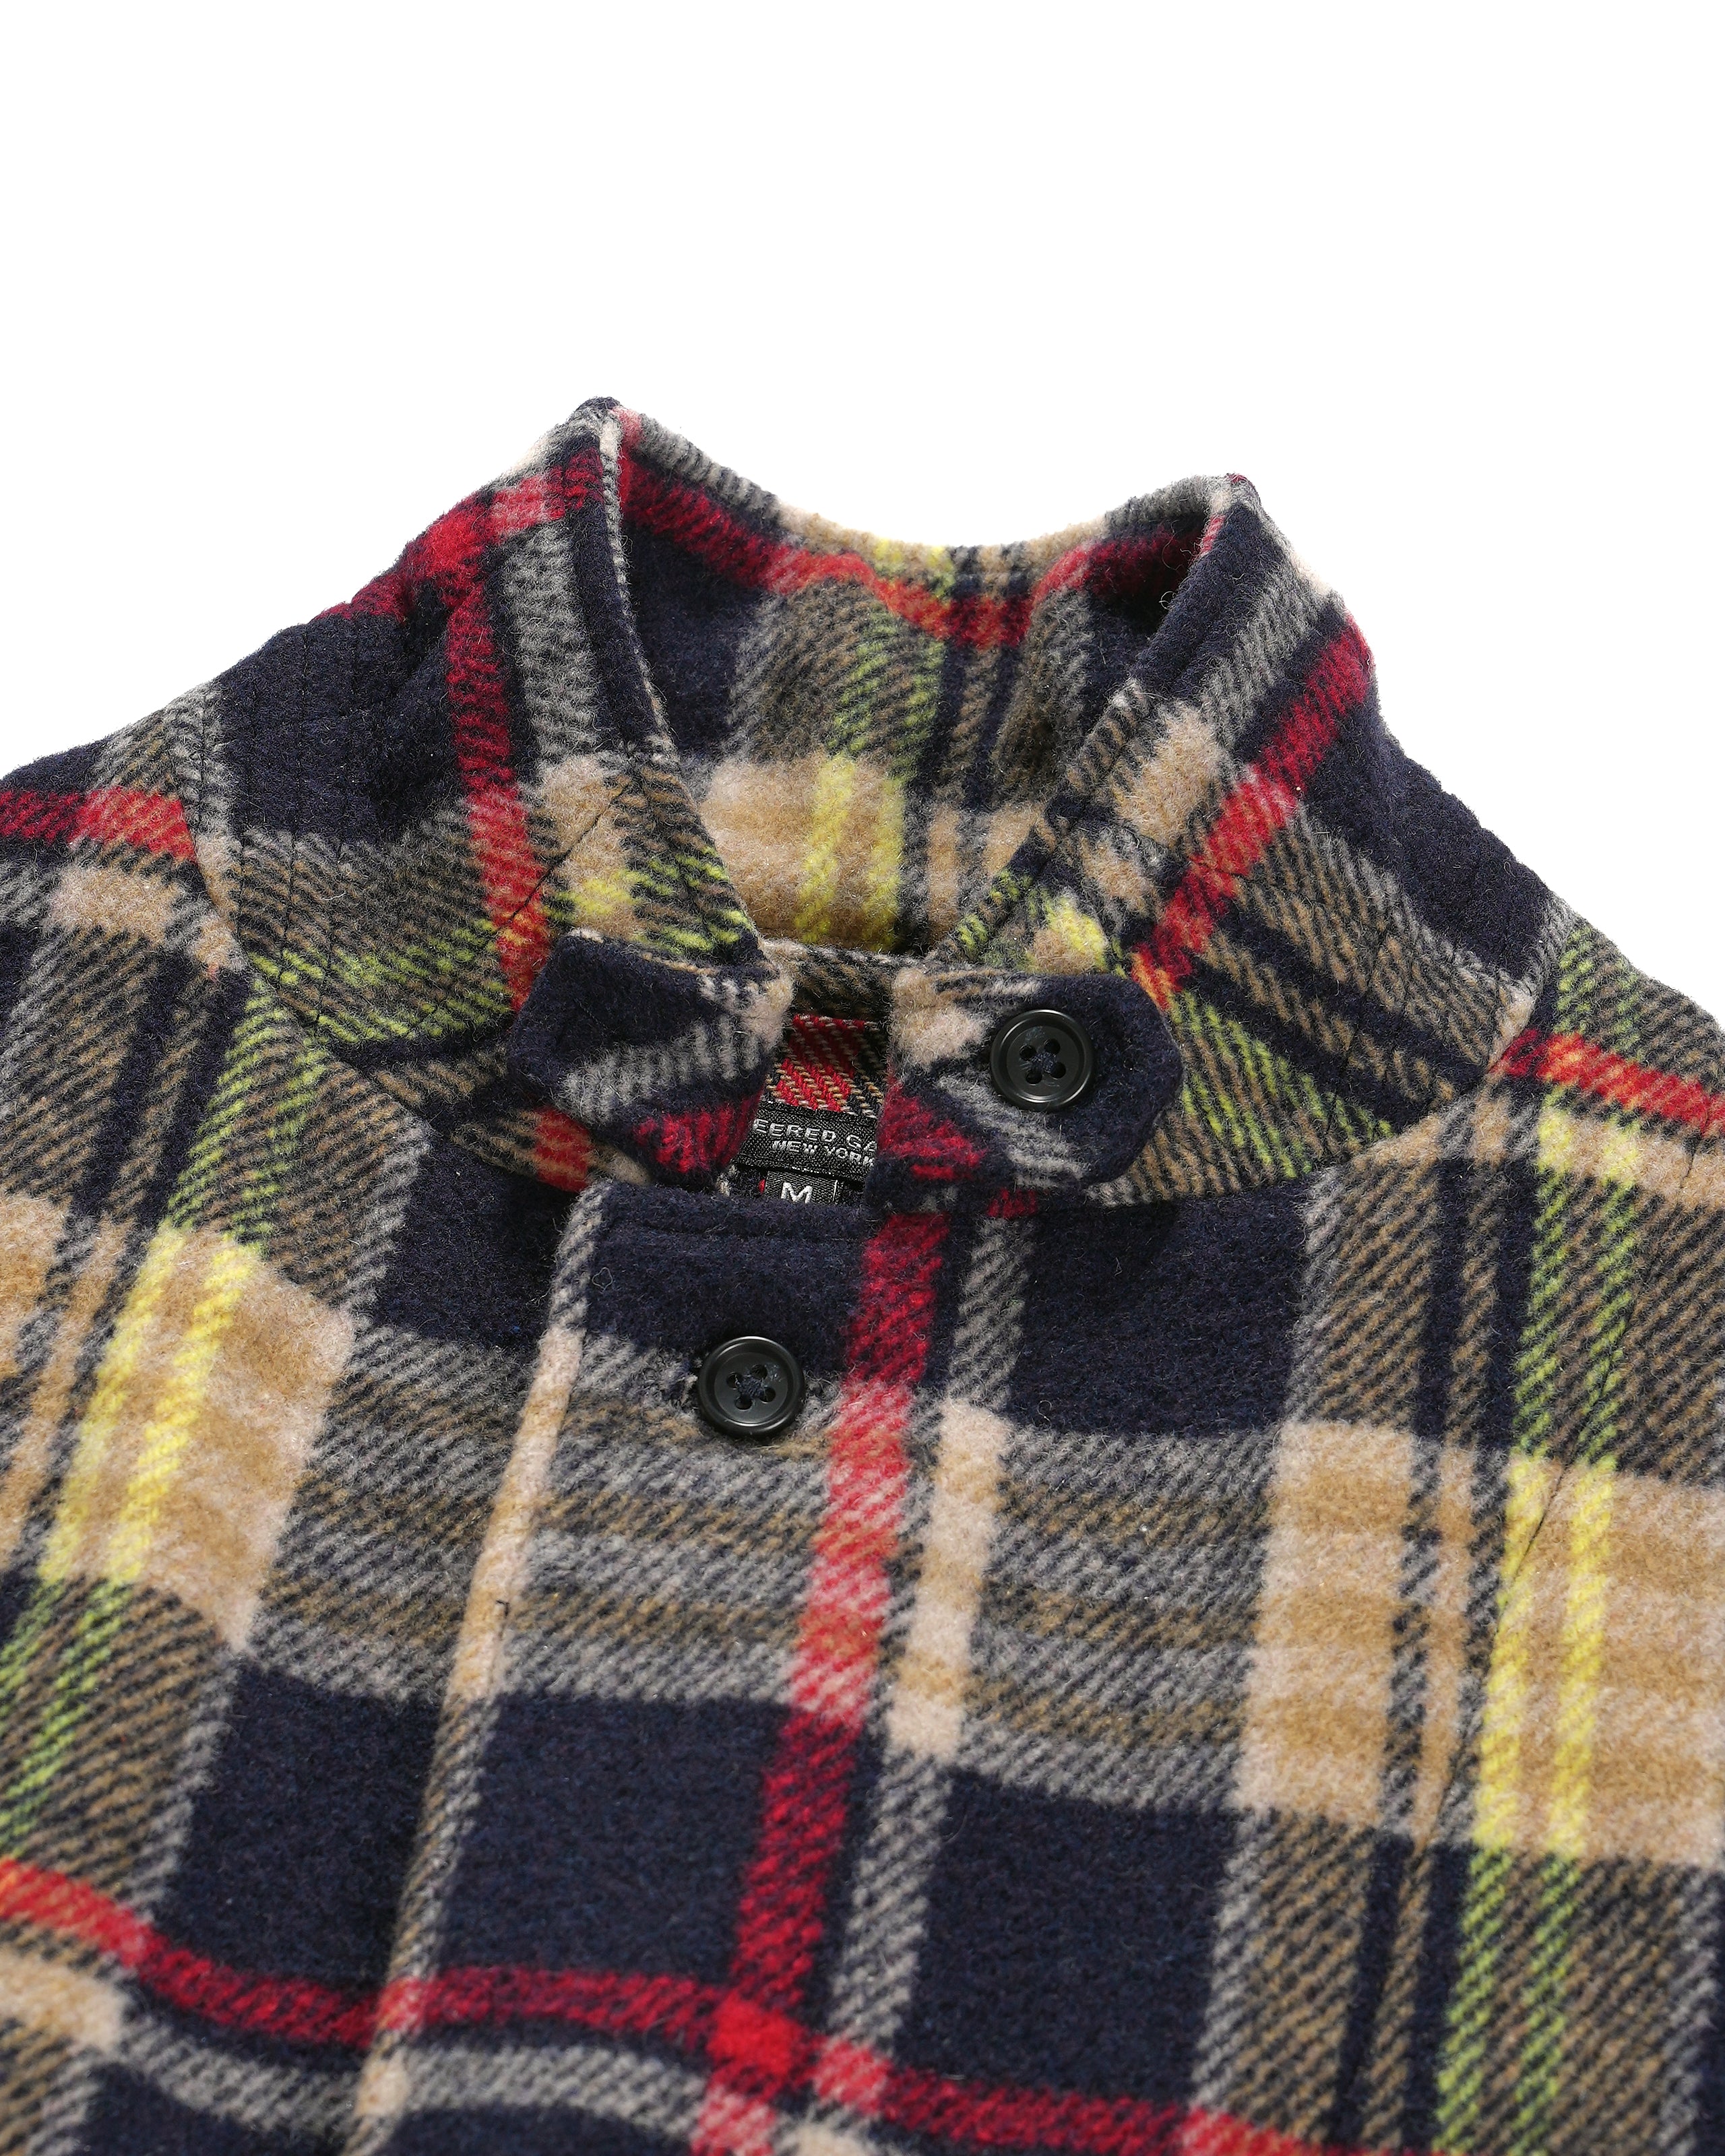 Loiter Jacket - Navy / Red Polyester Heavy Plaid